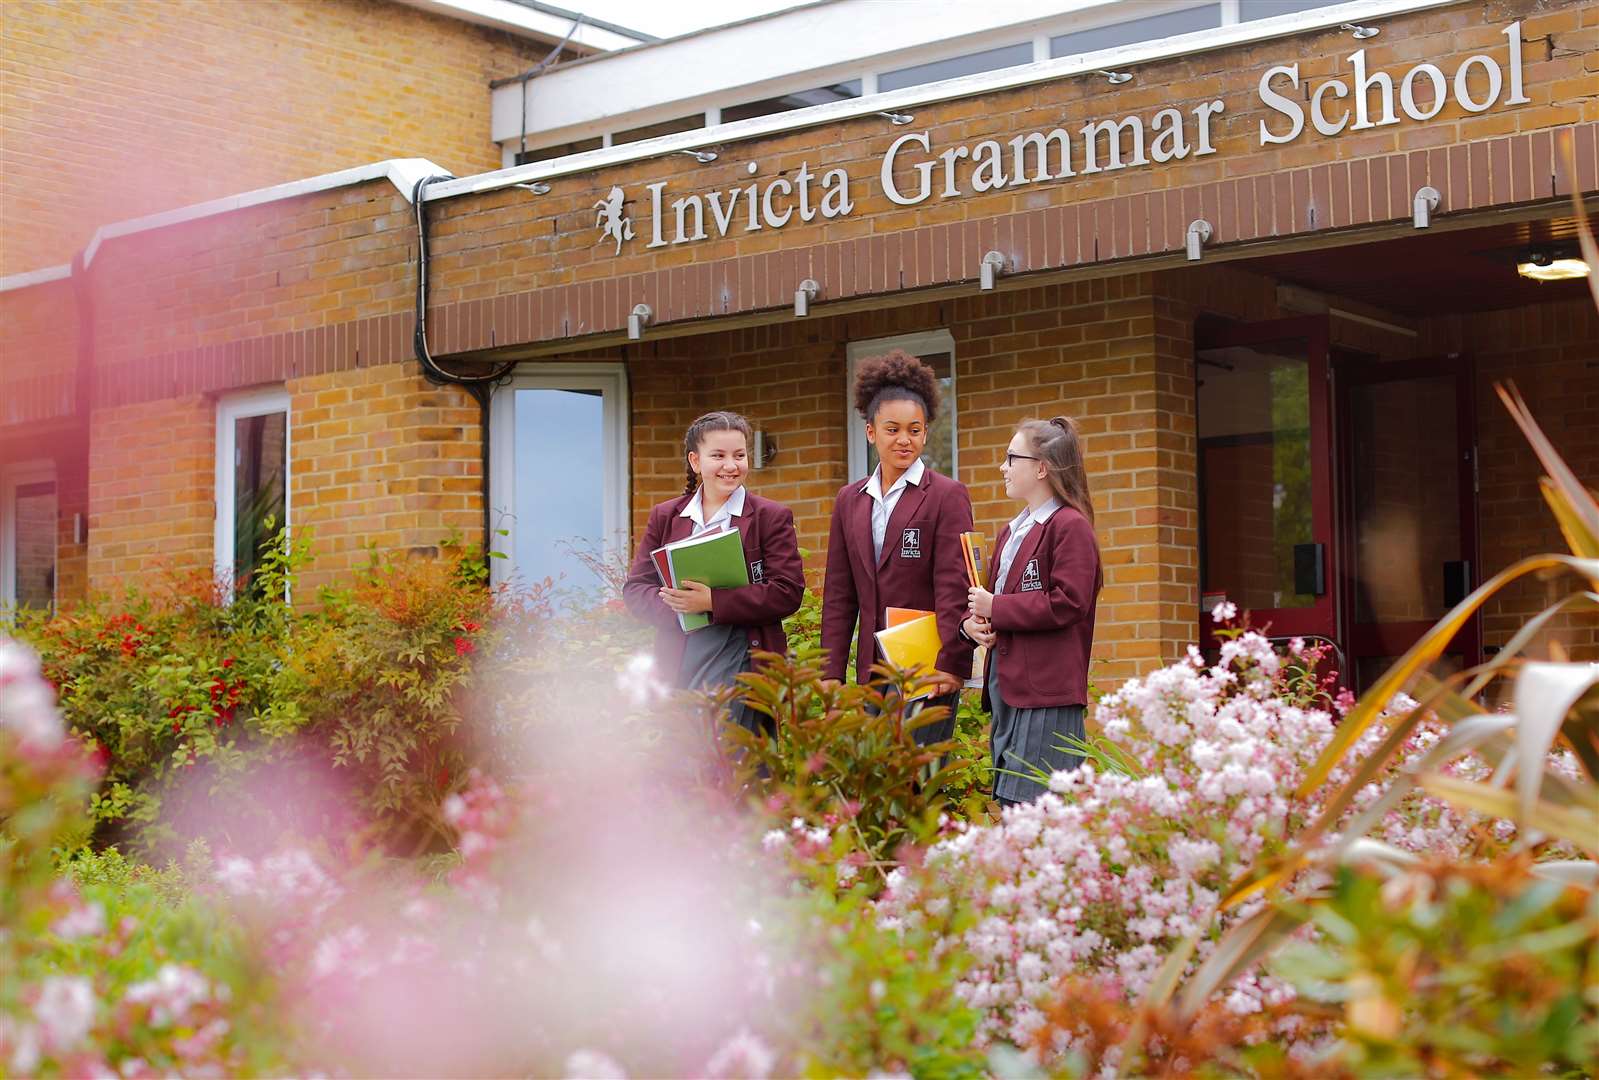 Invicta Grammar School has received ‘outstanding’ again in its most recent Ofsted inspection